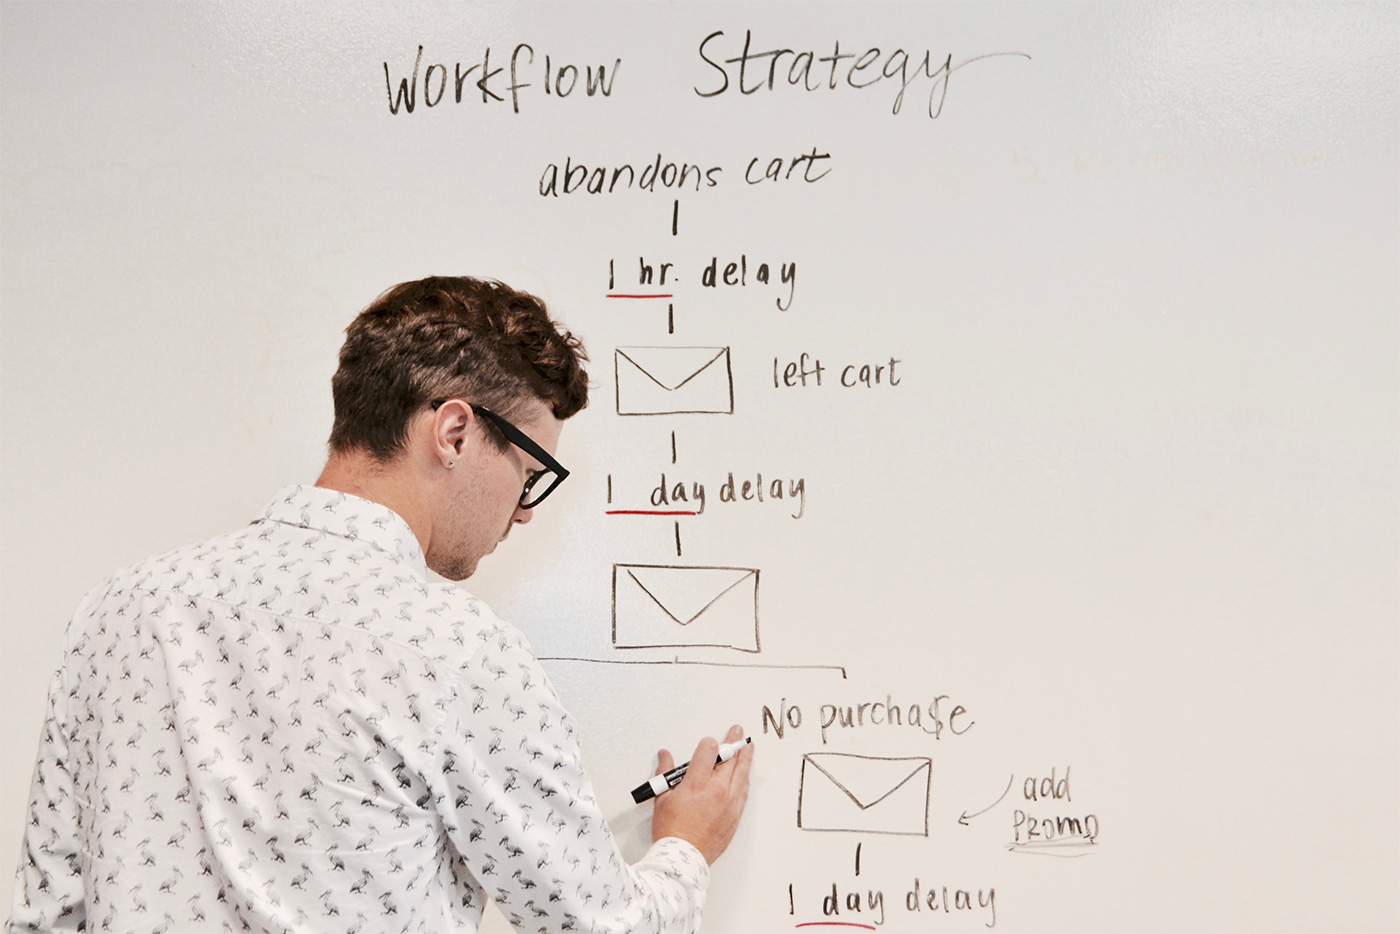 man making notes on a whiteboard about Workflow Strategy 